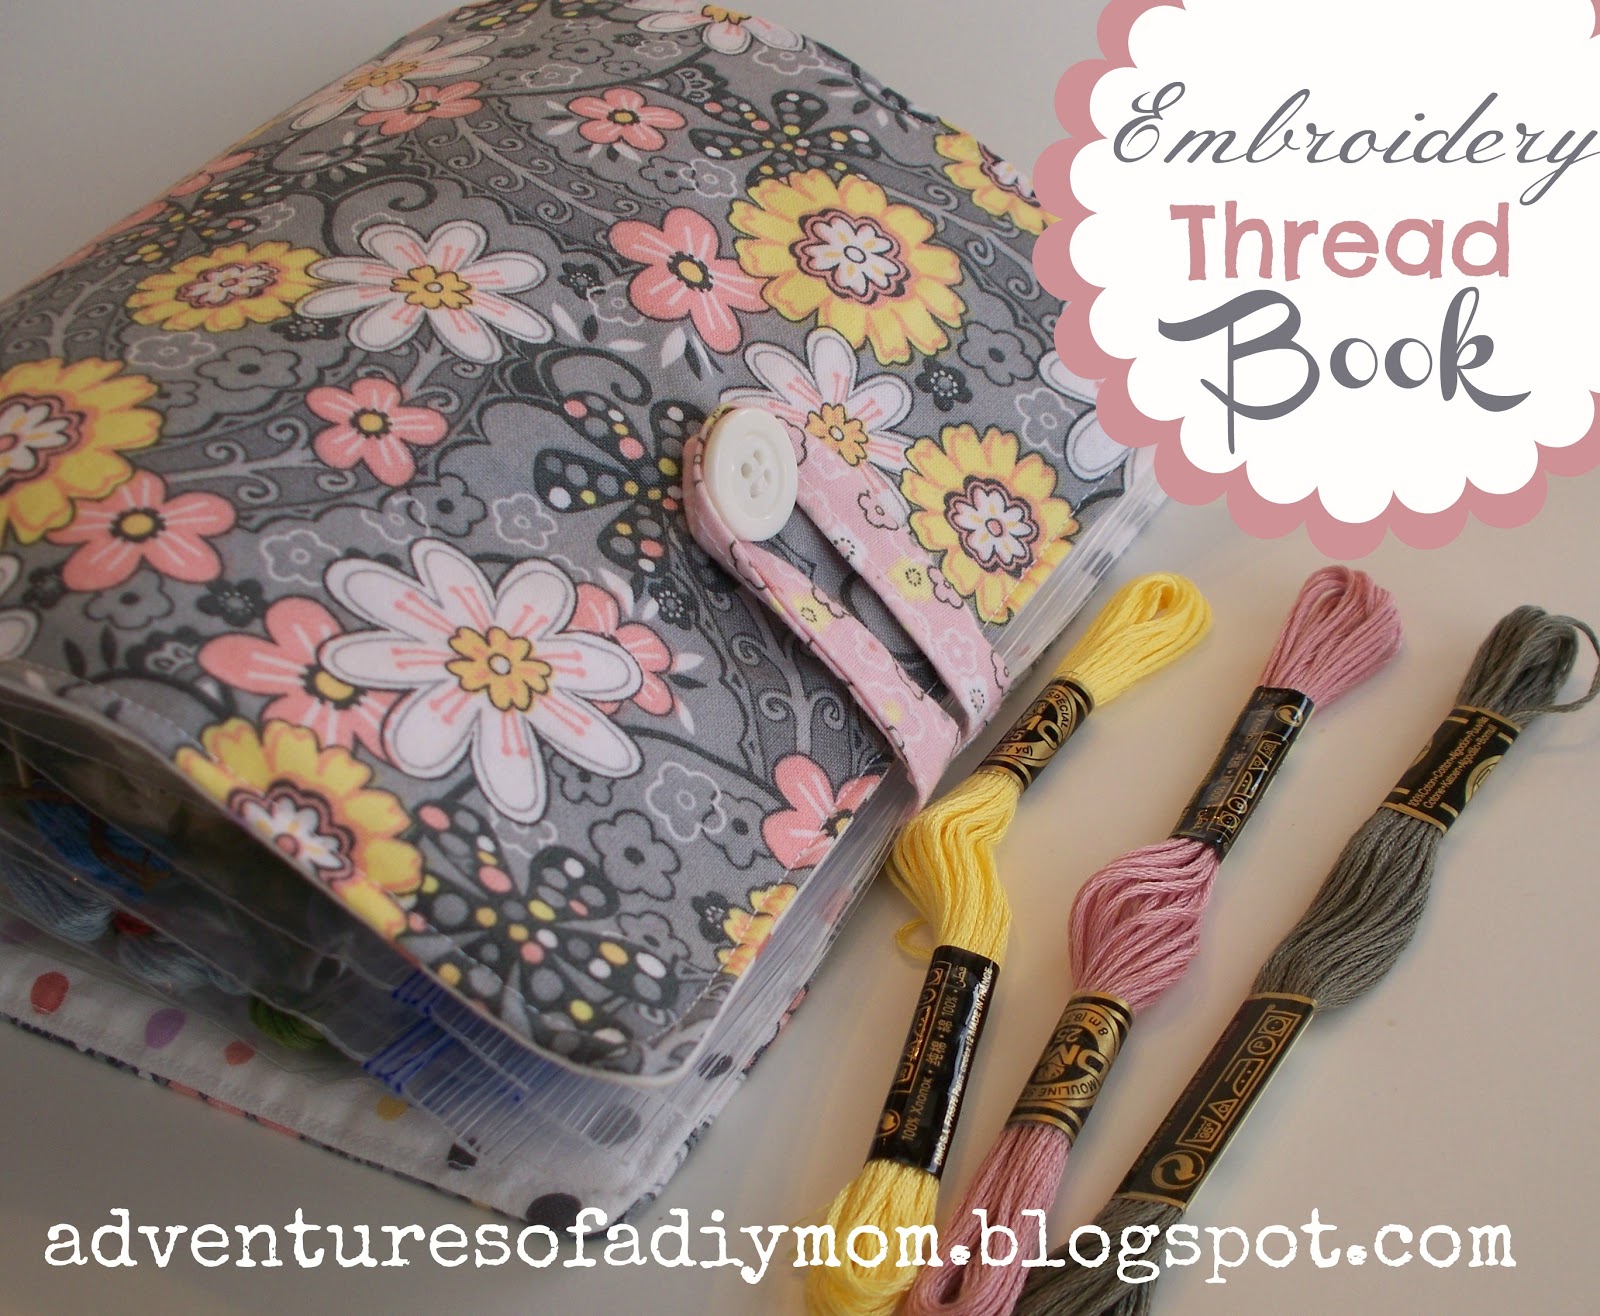 Embroidery Storage For Threads, Floss & More